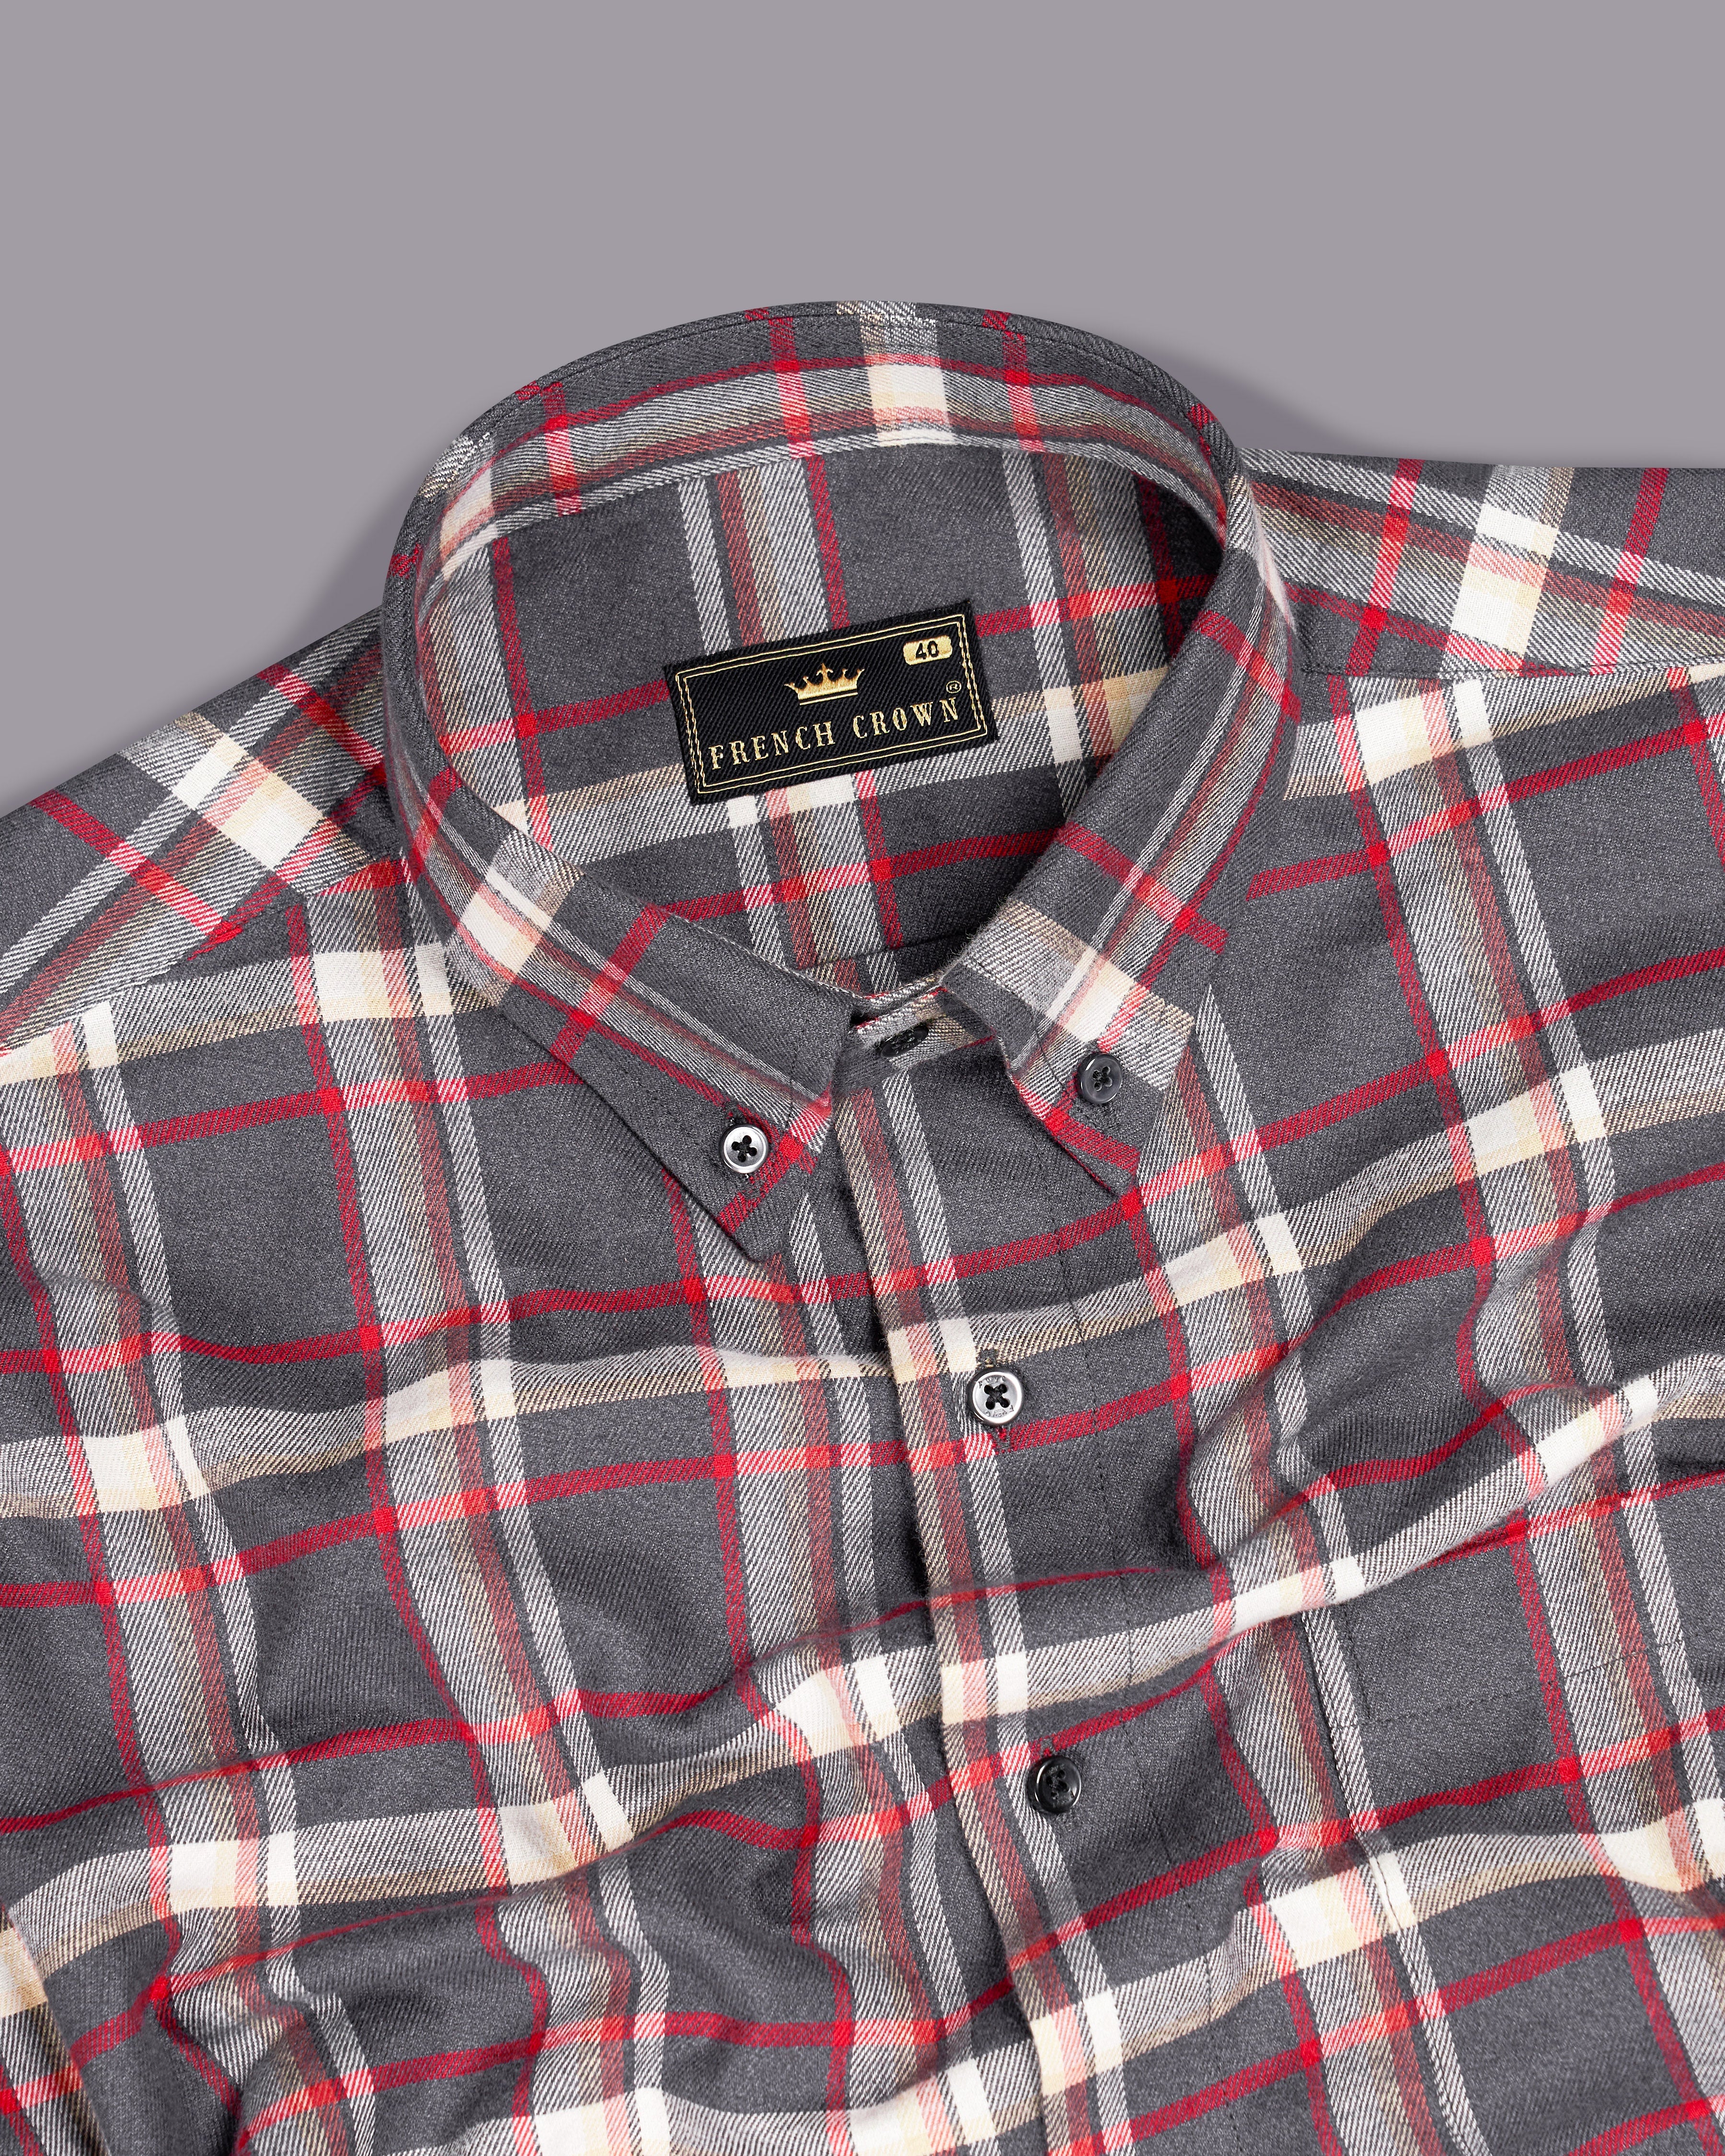 Ironside Gray with off White and Shiraz Red Plaid Flannel Shirt 9226-BD-BLK-38,9226-BD-BLK-H-38,9226-BD-BLK-39,9226-BD-BLK-H-39,9226-BD-BLK-40,9226-BD-BLK-H-40,9226-BD-BLK-42,9226-BD-BLK-H-42,9226-BD-BLK-44,9226-BD-BLK-H-44,9226-BD-BLK-46,9226-BD-BLK-H-46,9226-BD-BLK-48,9226-BD-BLK-H-48,9226-BD-BLK-50,9226-BD-BLK-H-50,9226-BD-BLK-52,9226-BD-BLK-H-52